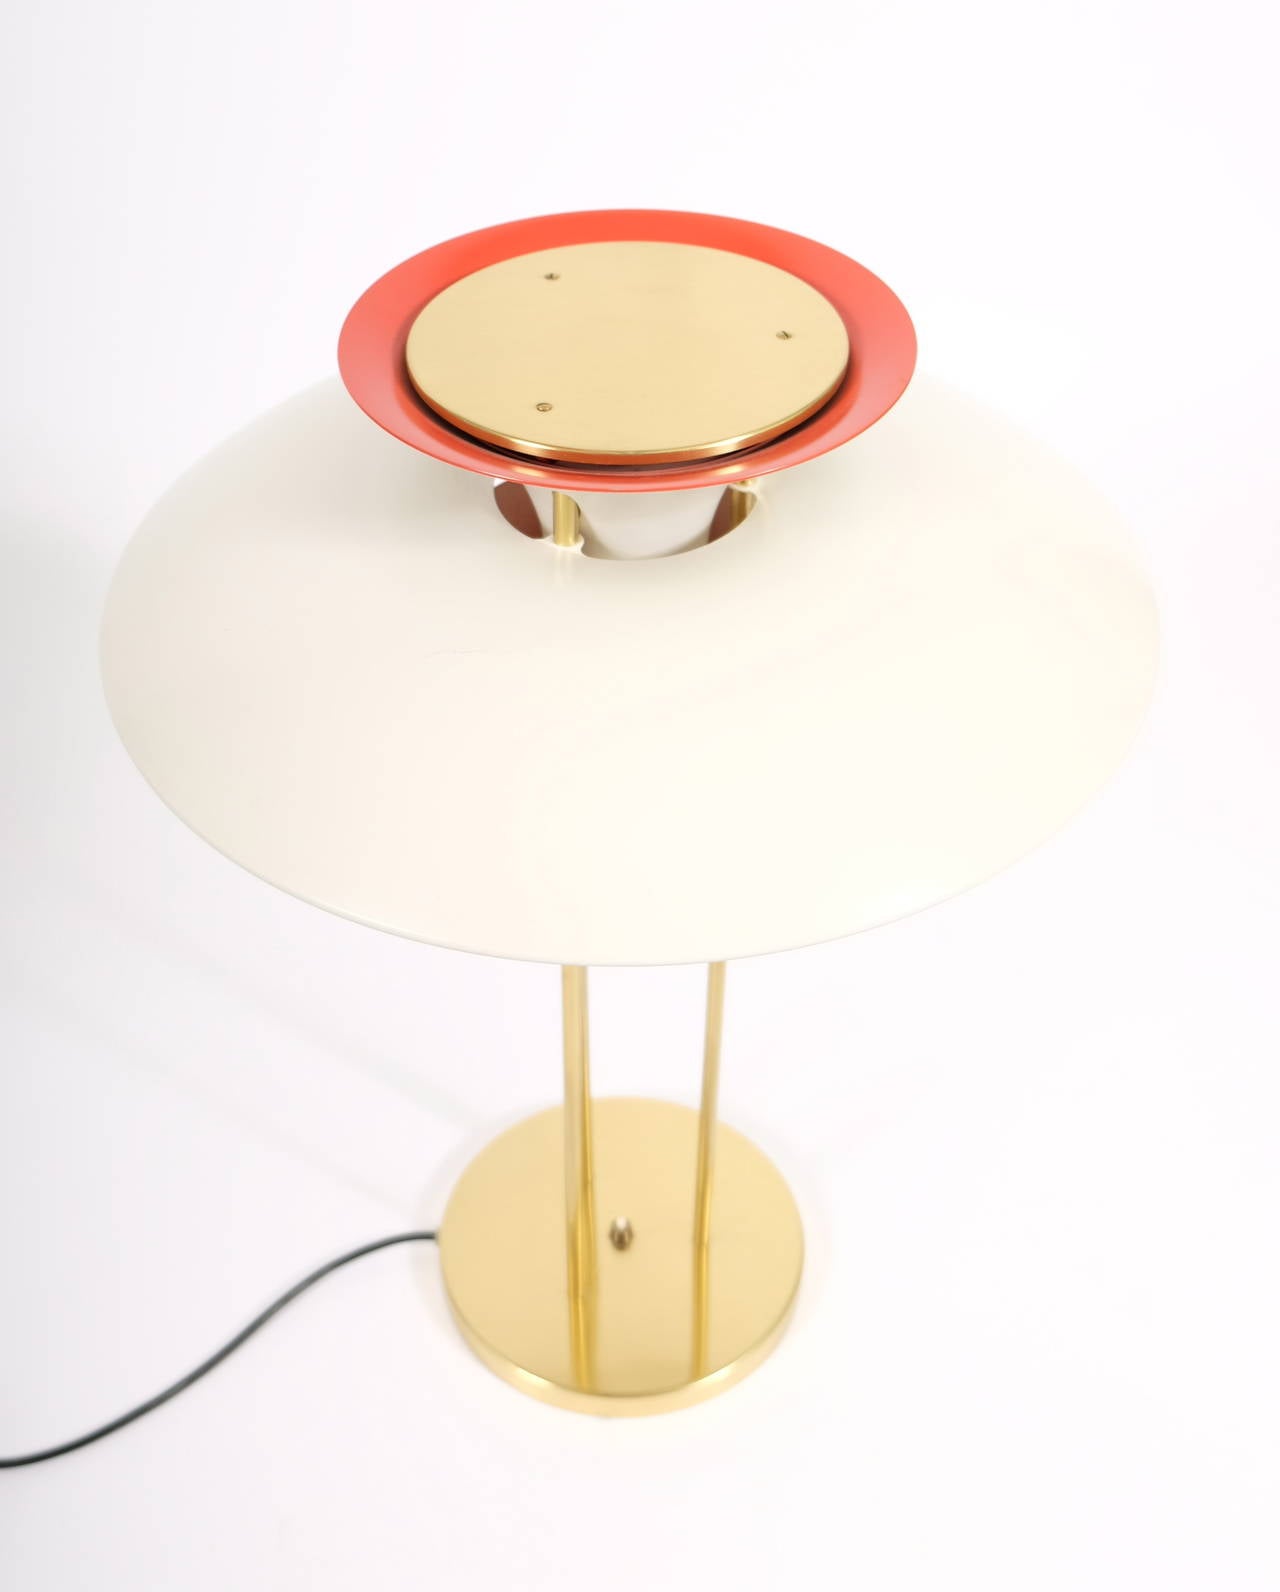 Poul Henningsen PH5 Table Lamp

very beautiful lamp in fantastic condition

with Louis Poulsen label

out of production

in aluminium and brass